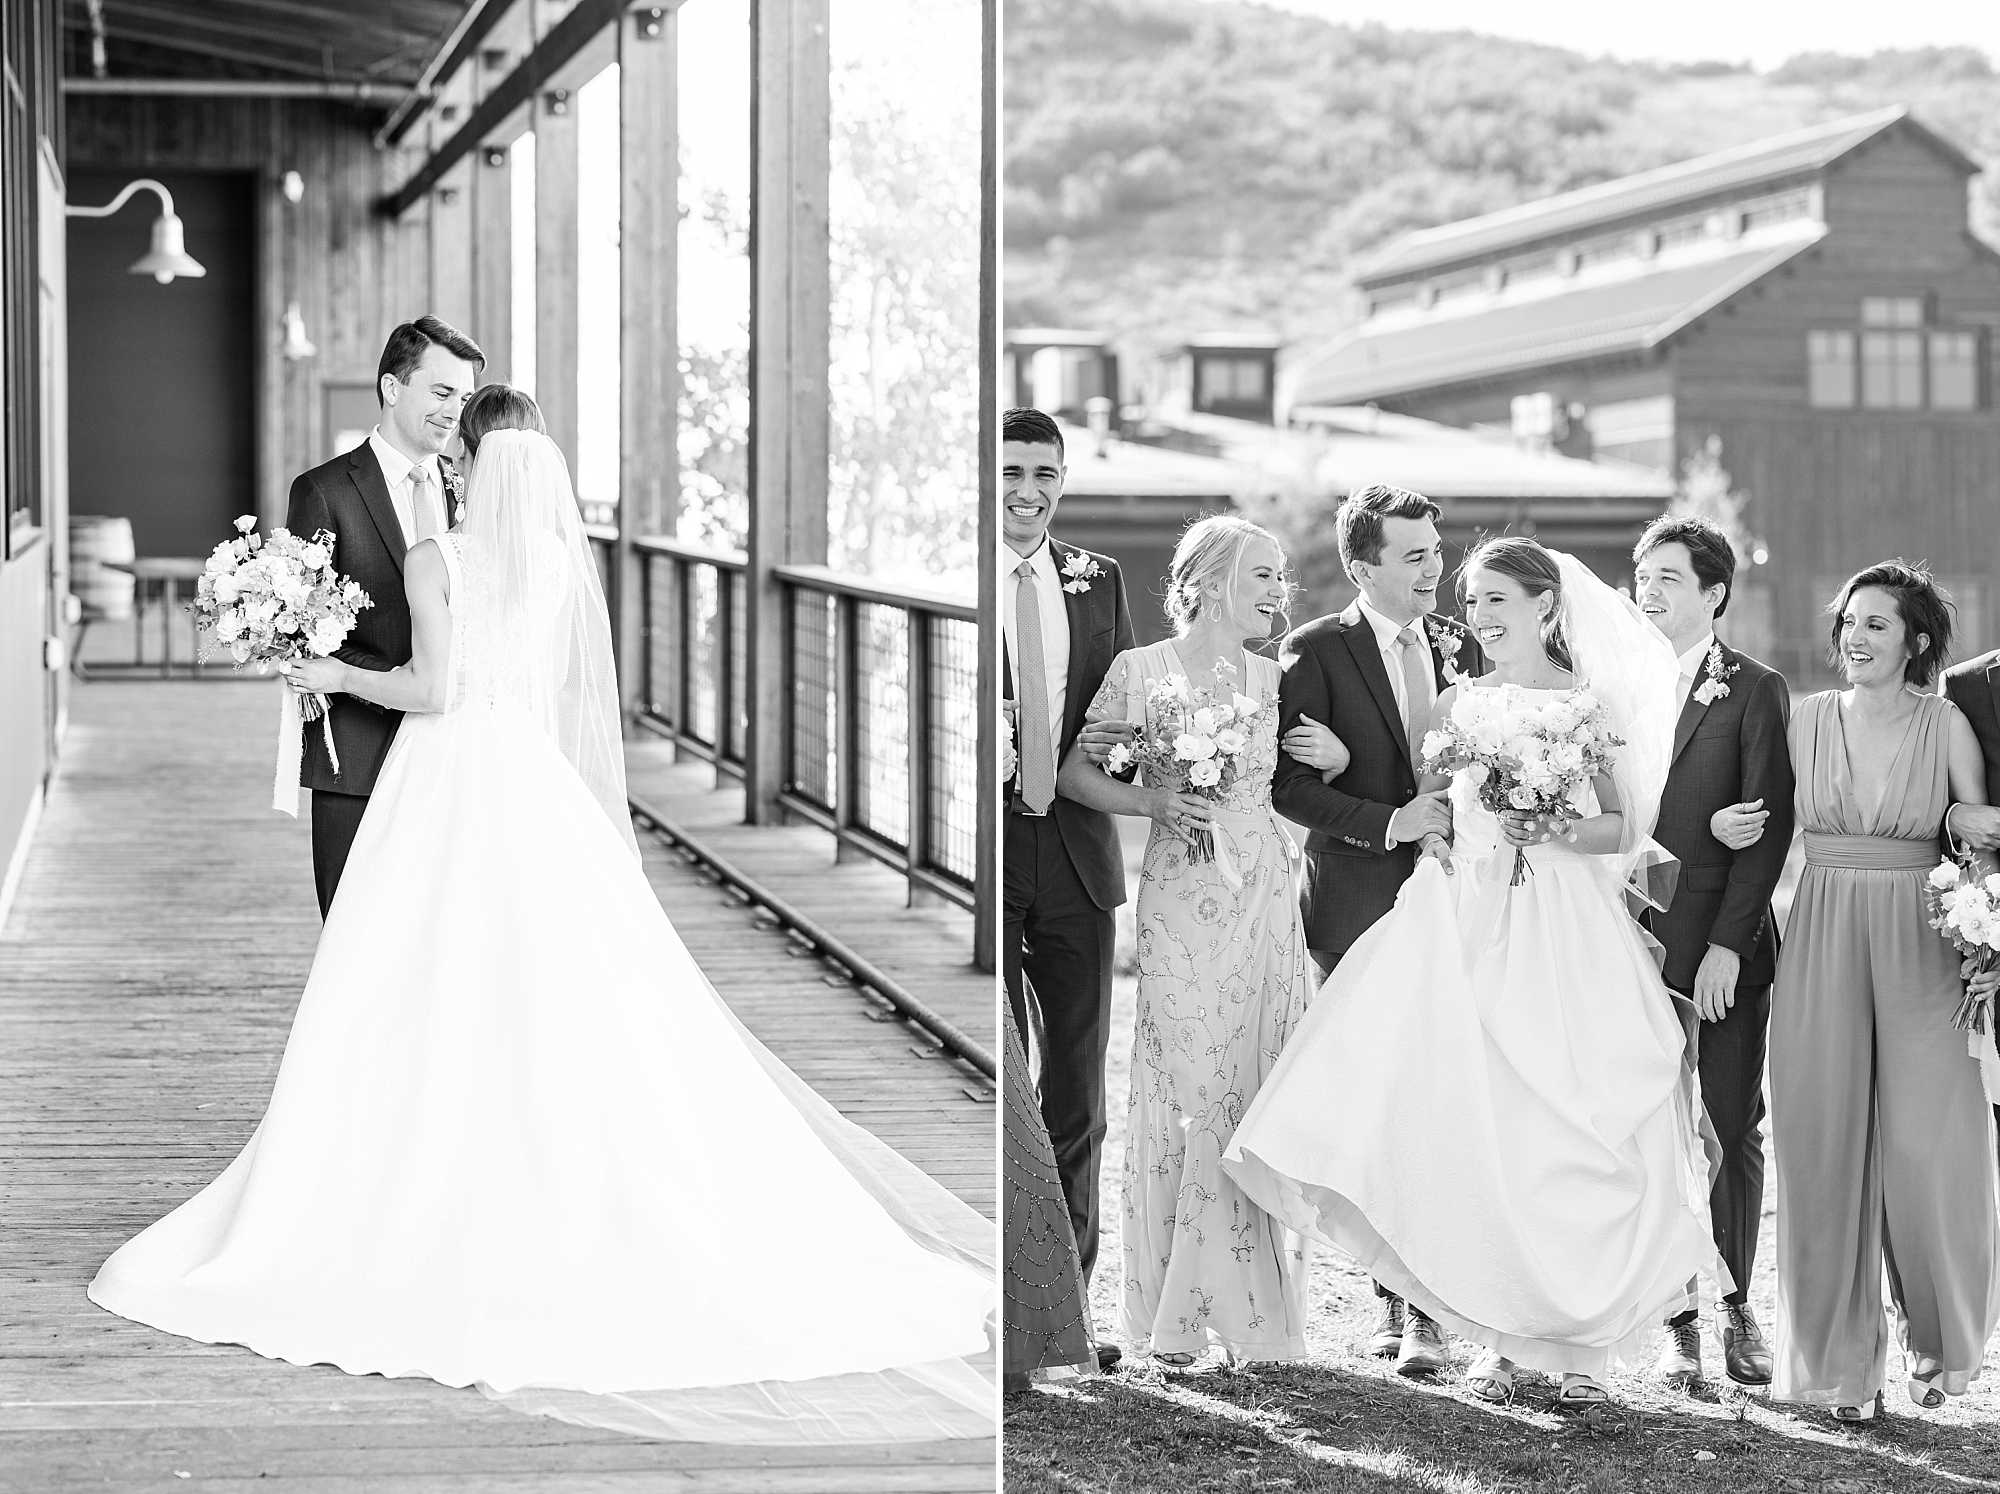 Have your Park City destination wedding at the Lodge at Blue Sky